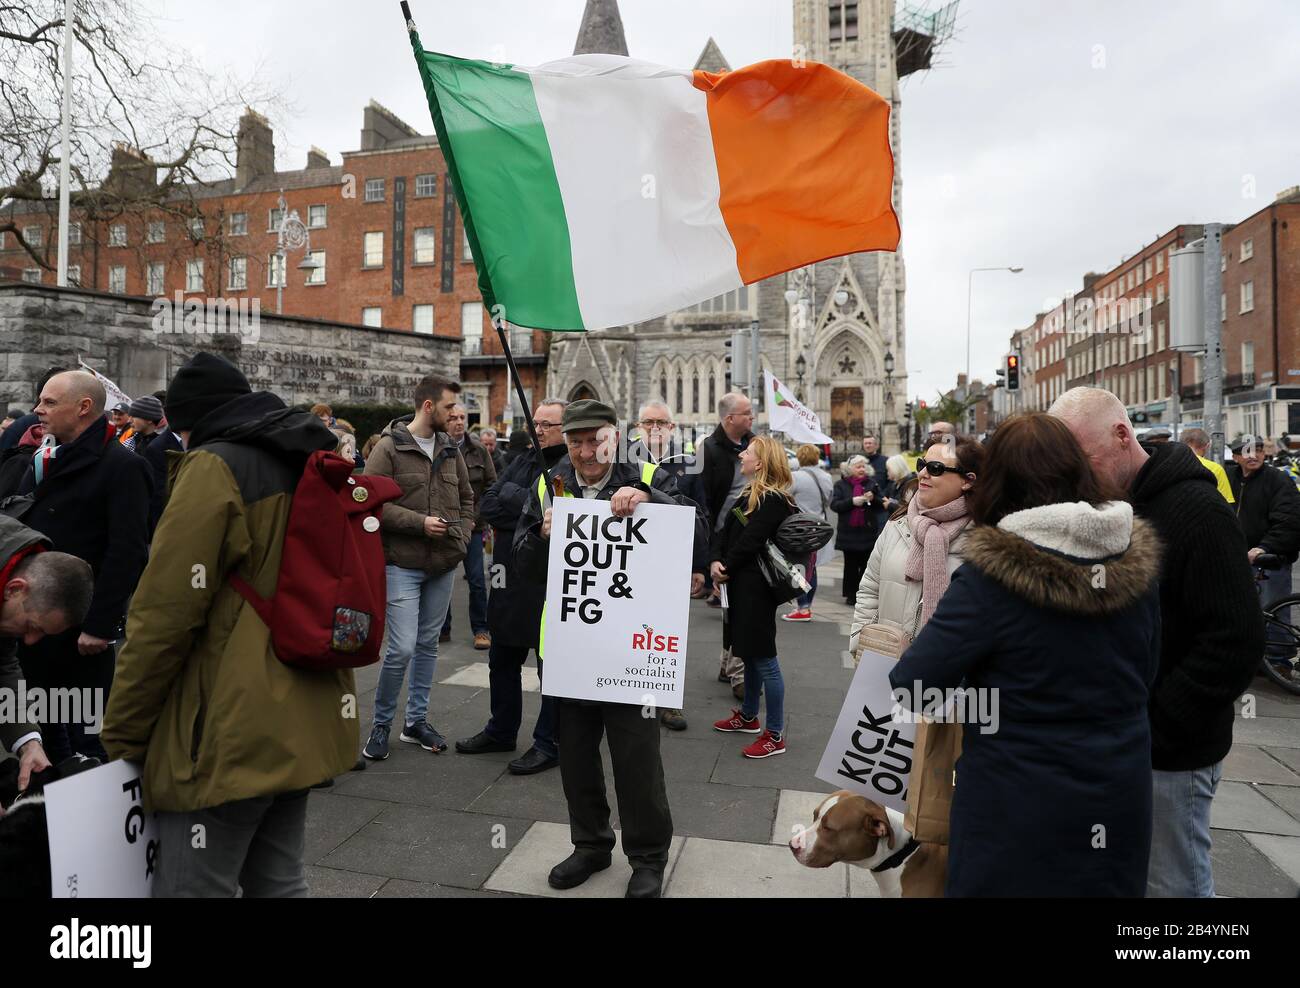 Paddy Morrissey, from Charleville, Cork, arrives to participate in a march in Dublin's city centre organized to demonstrate opposition to the formation of a new government involving Fianna Fail or Fine Gael. Stock Photo